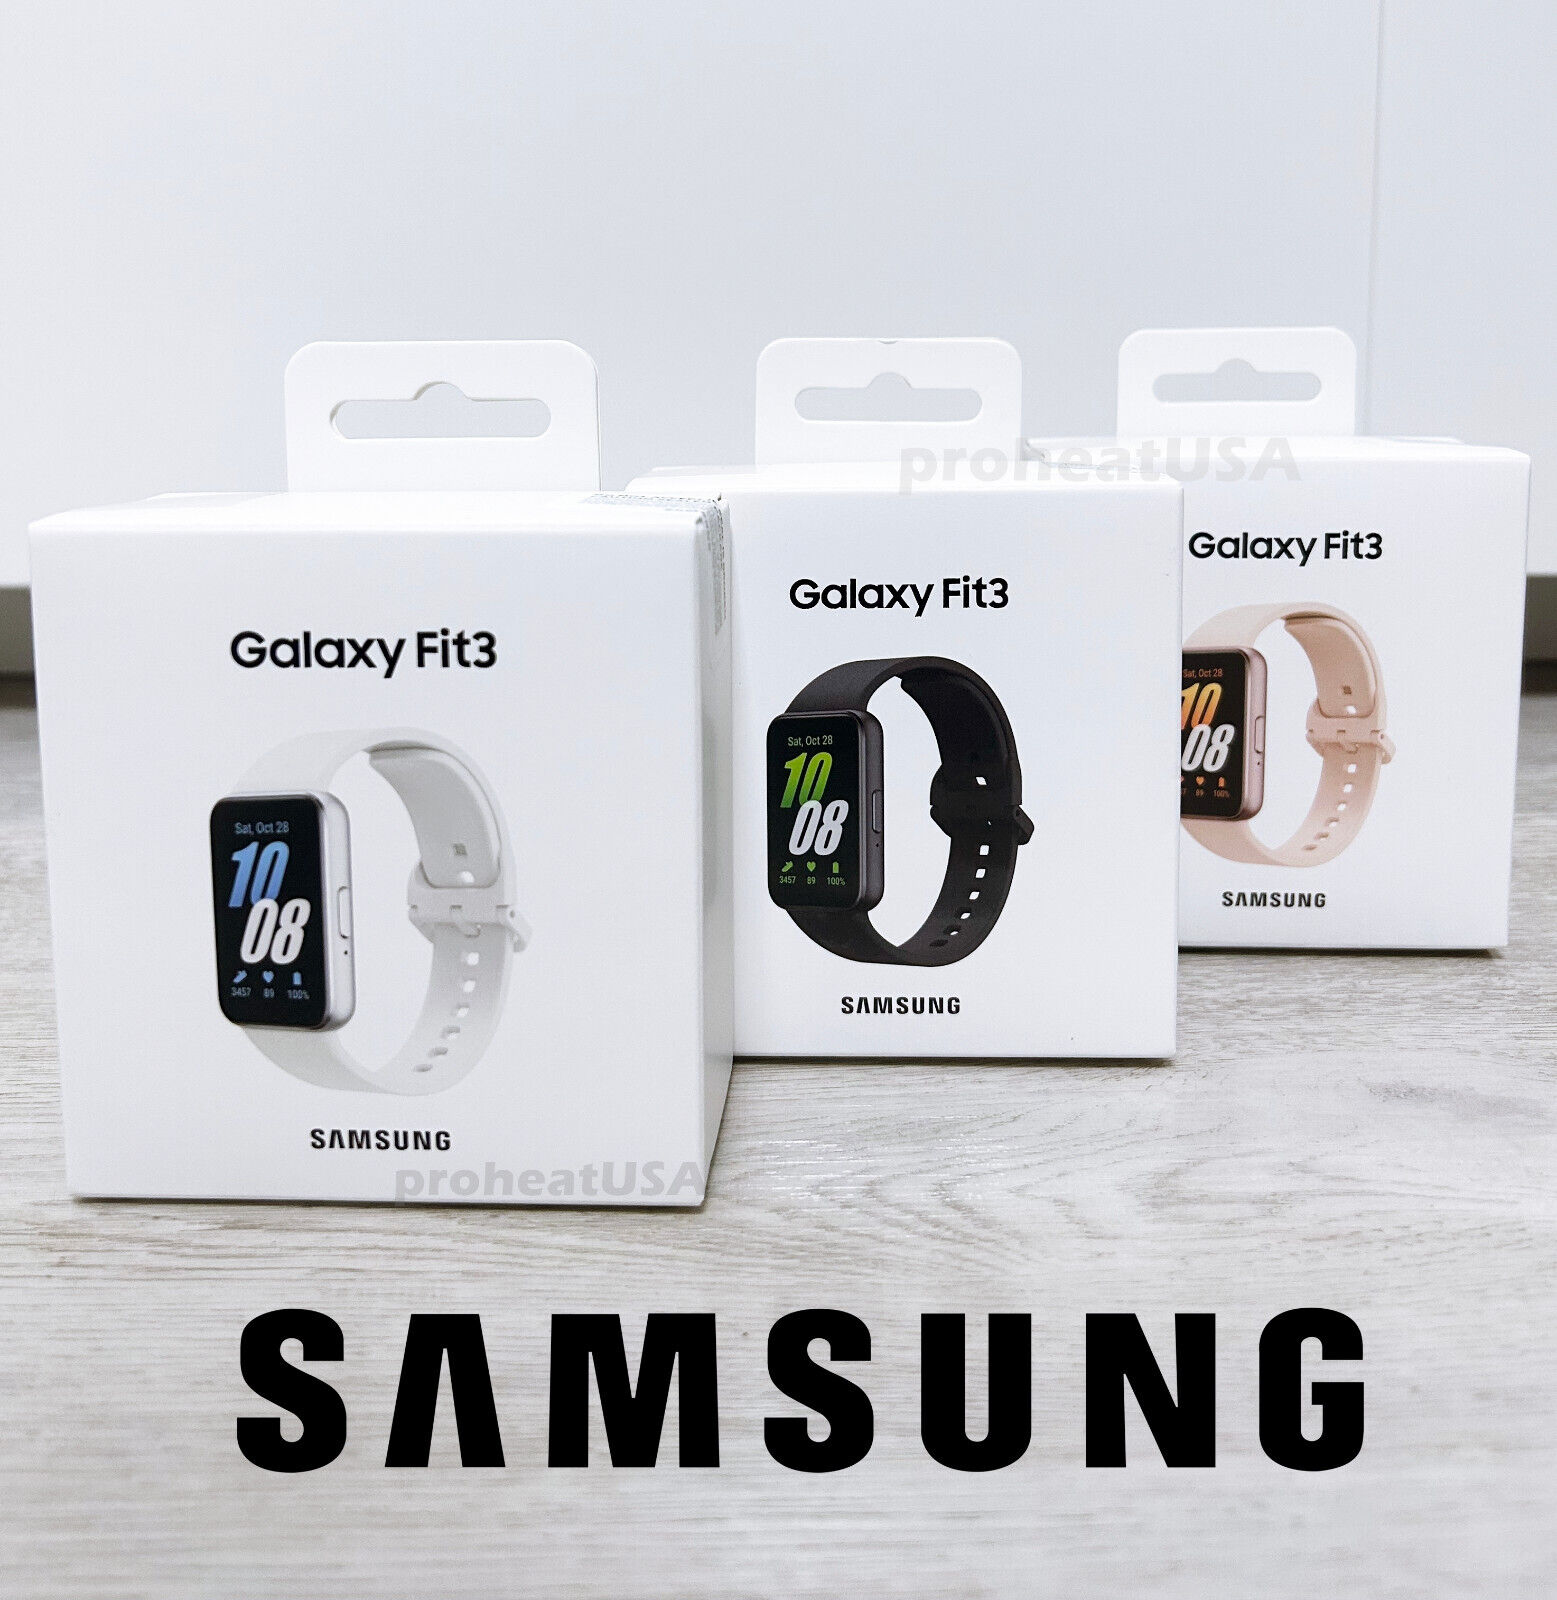 Samsung Galaxy Fit3 SM-R390 Fitness Tracker - 101 Workouts modes - AMOLED Screen